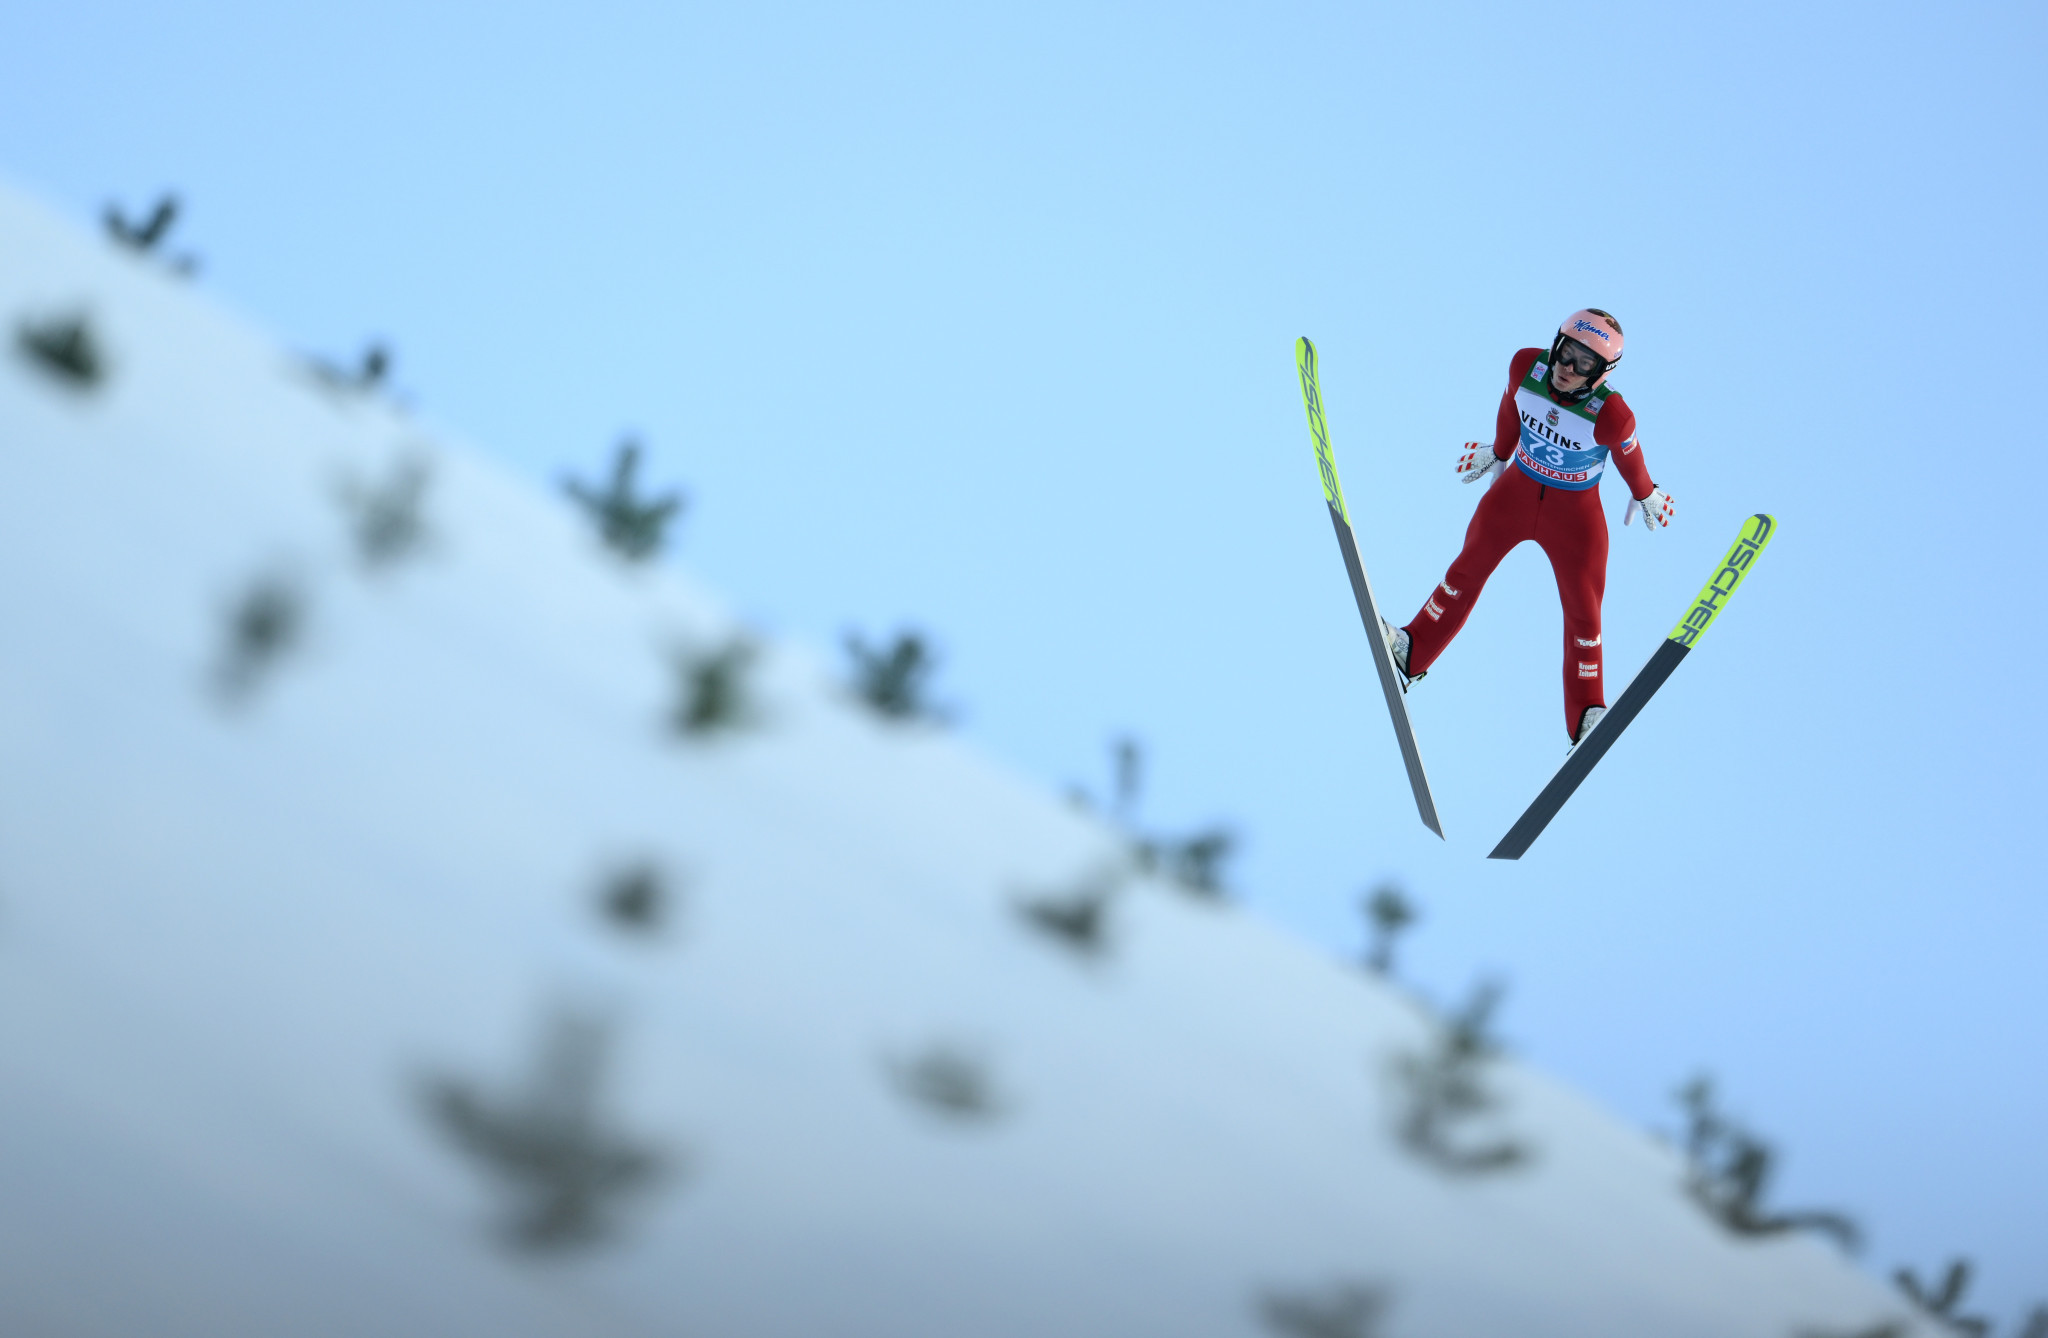 Stefan Kraft has finished top of qualification on the first two days of the Ski Jumping World Cup in Oberstdorf ©Getty Images